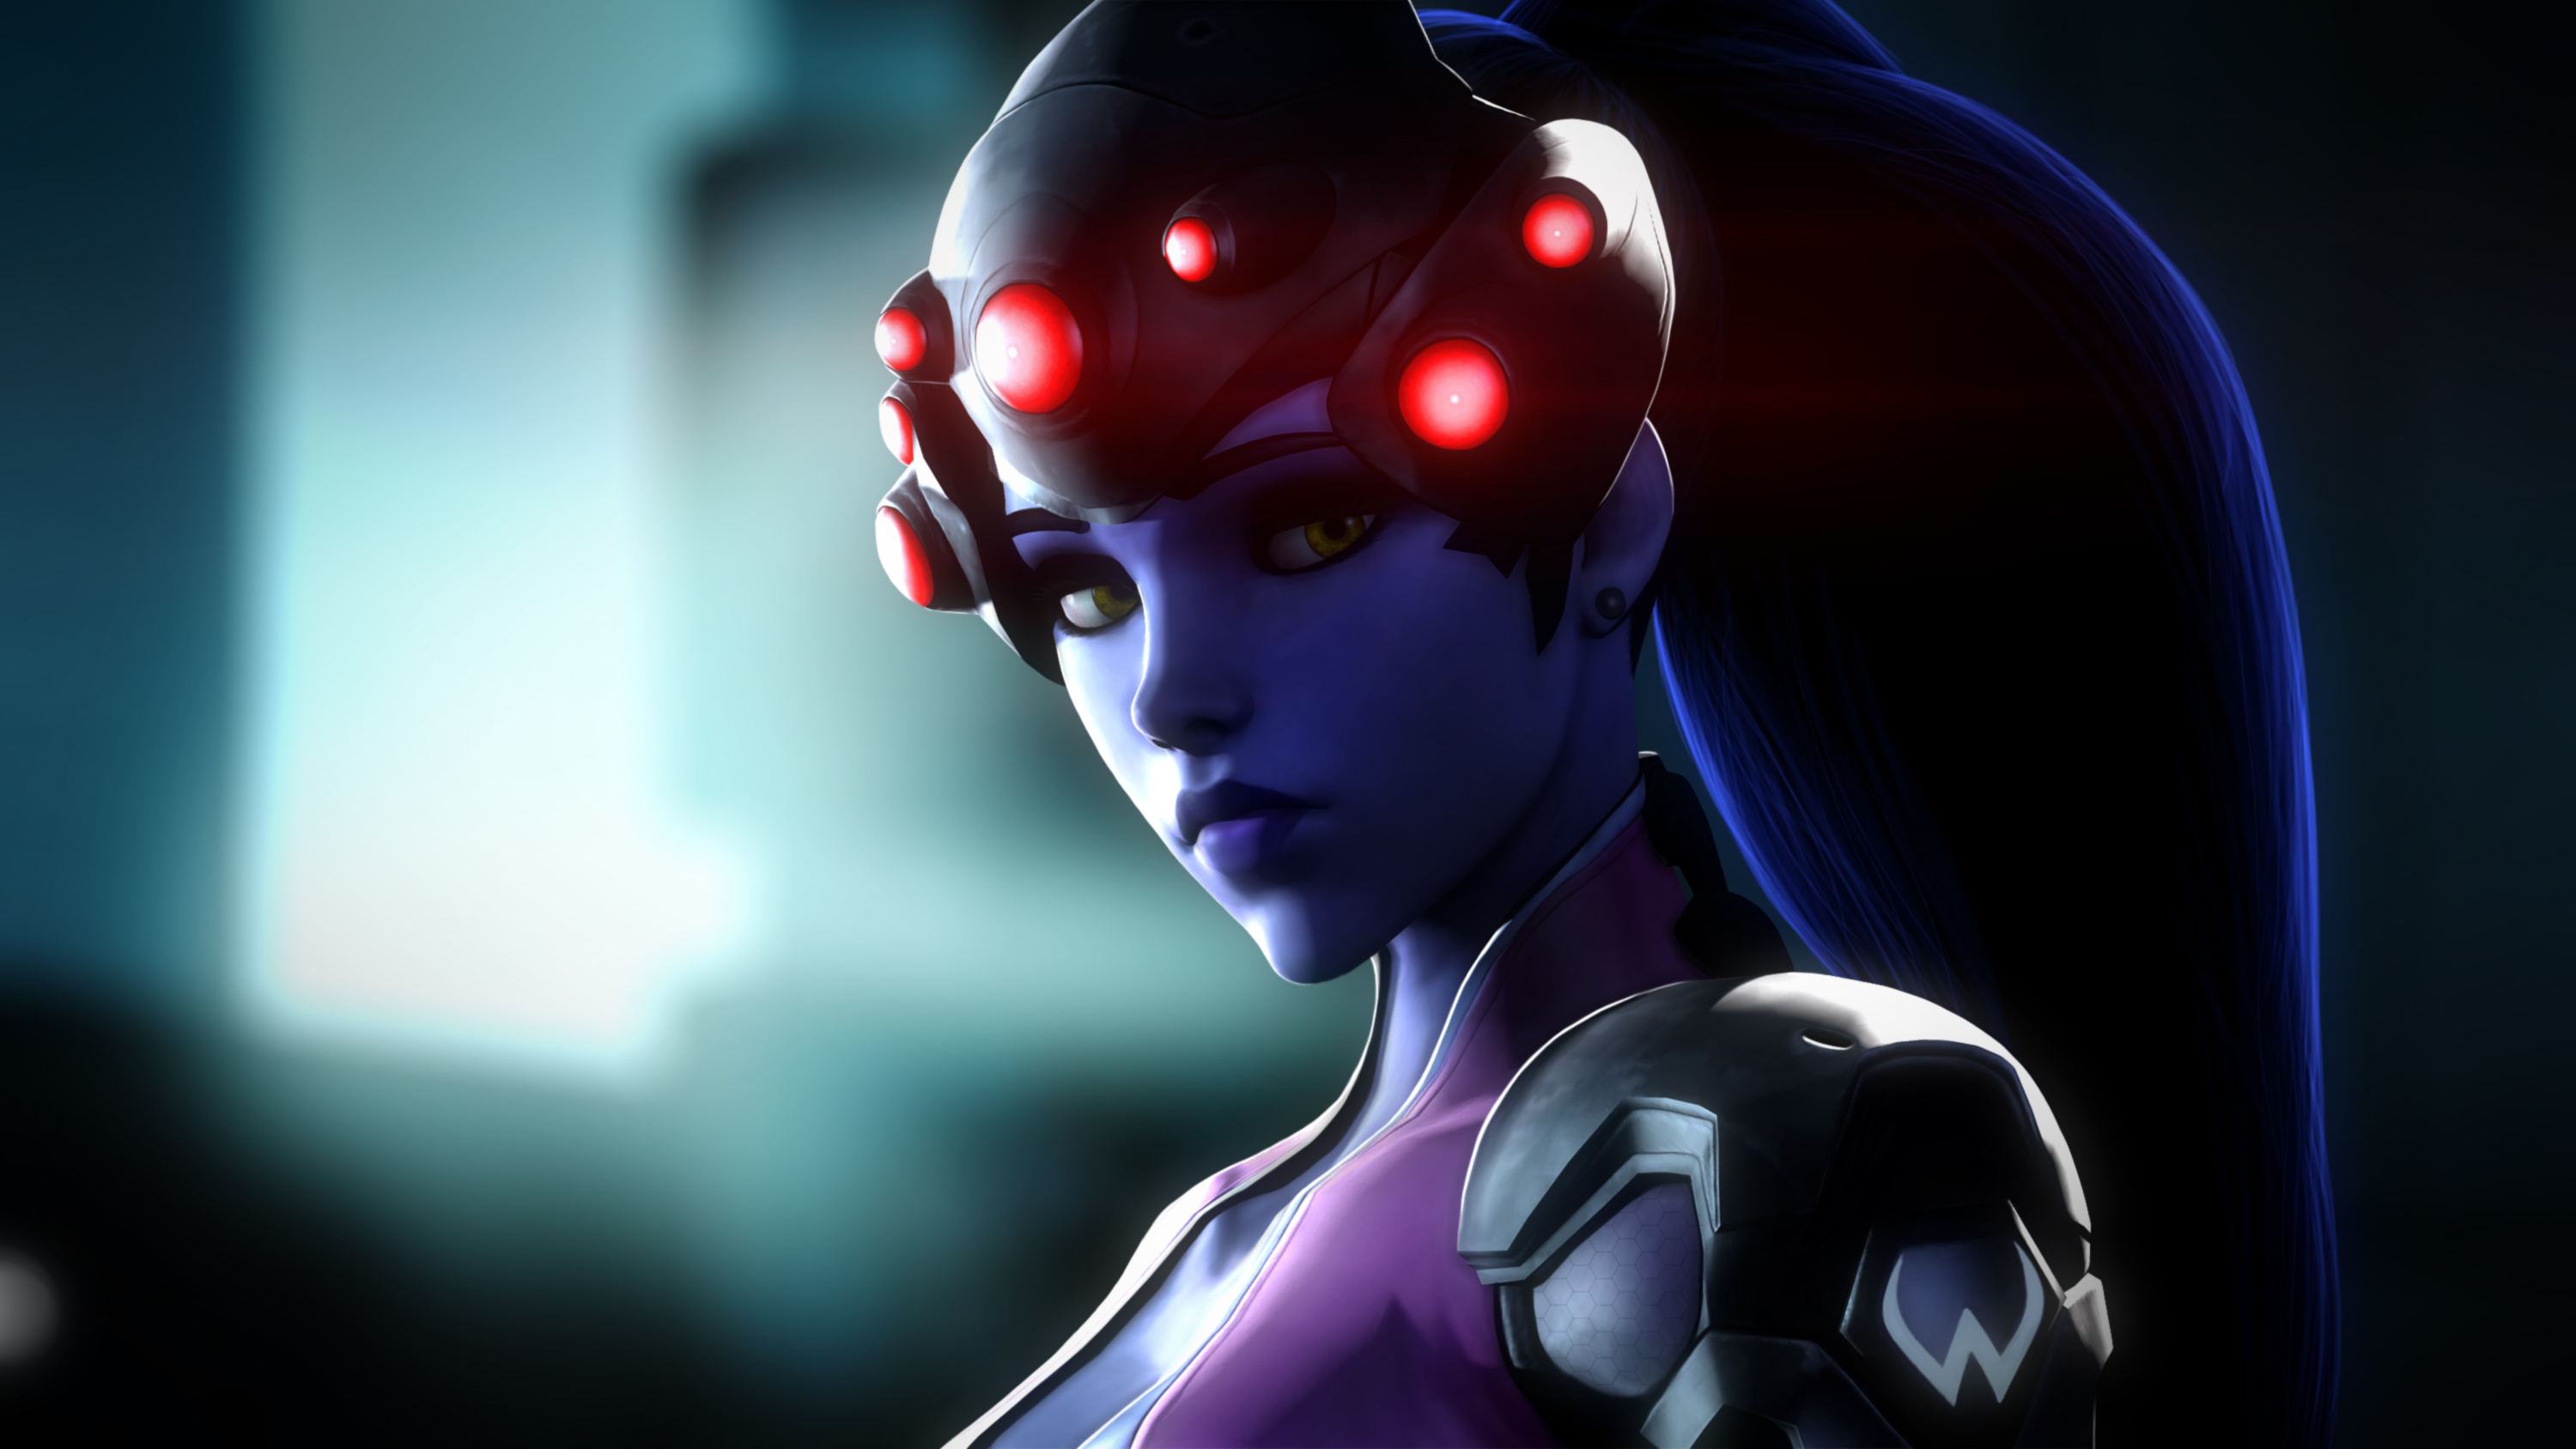 3000x1688 230+ Widowmaker (Overwatch) HD Wallpapers and Backgrounds